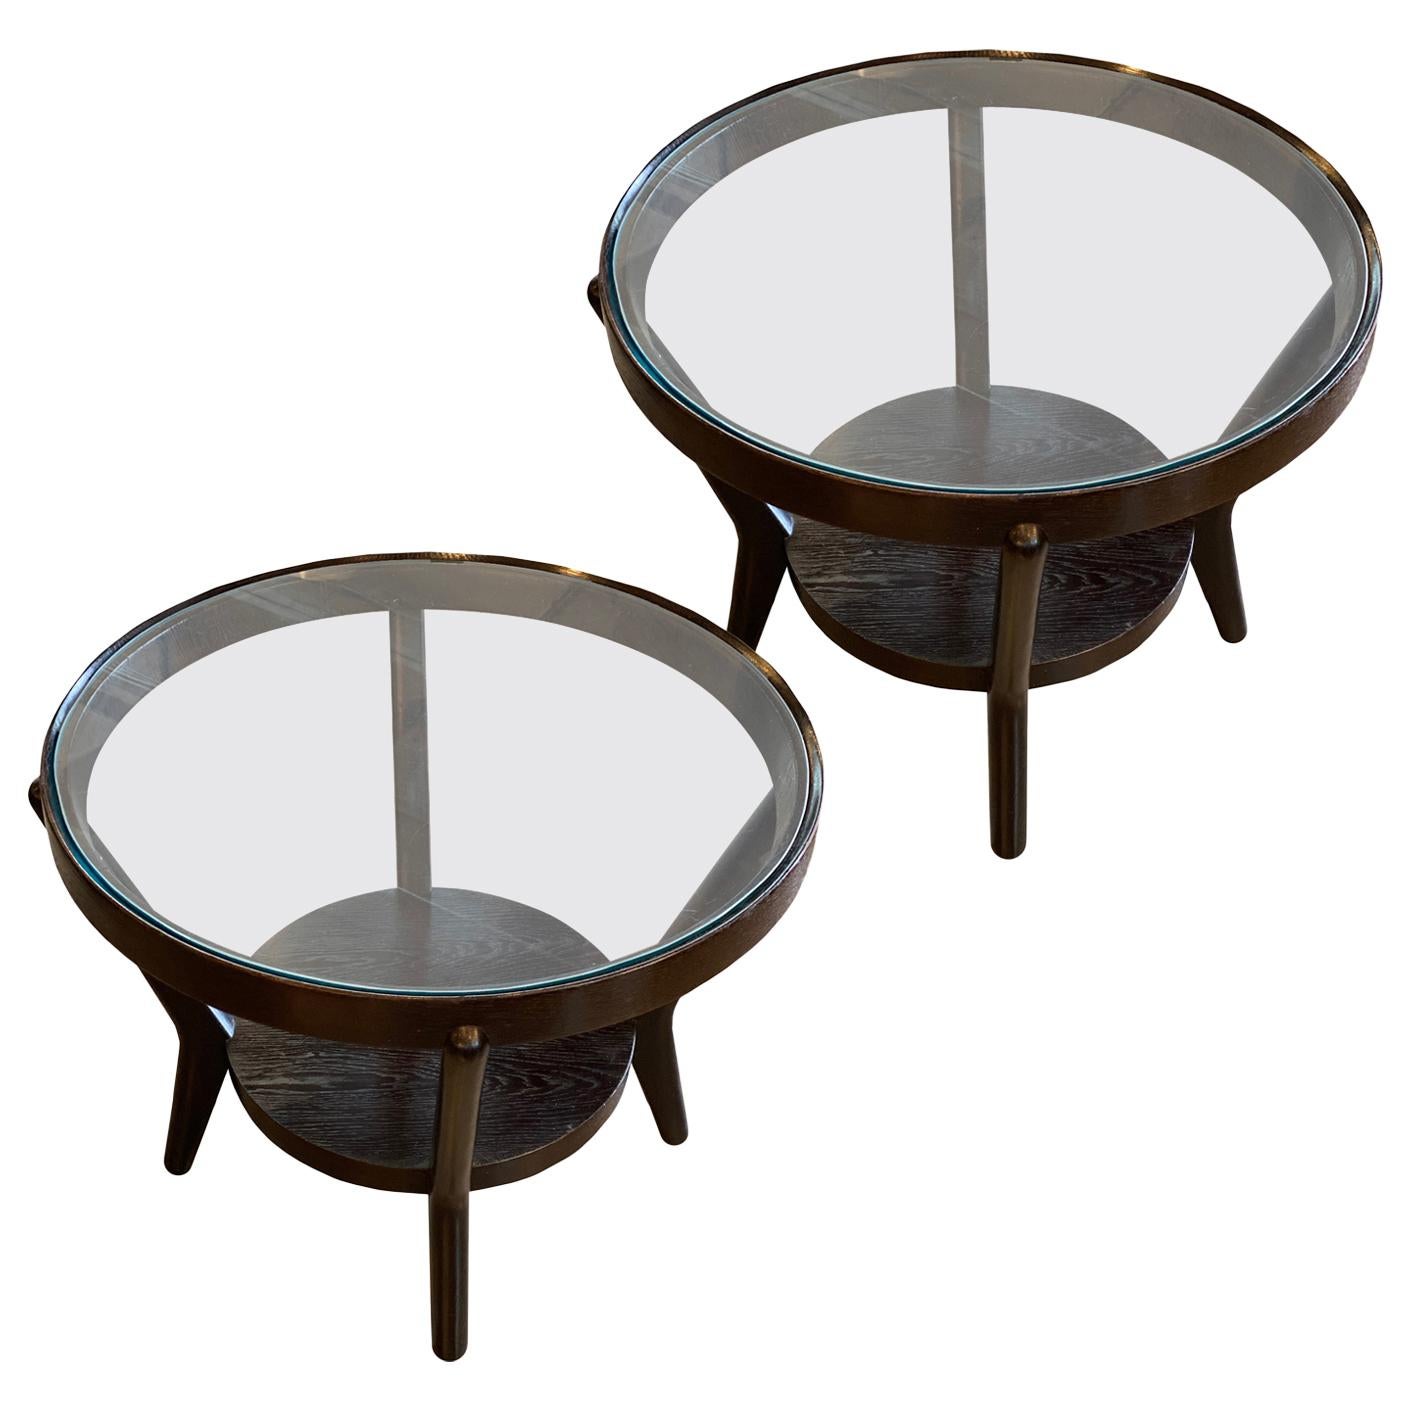 Art Deco Side Table with Ebonized Wood and Glass, 1930s